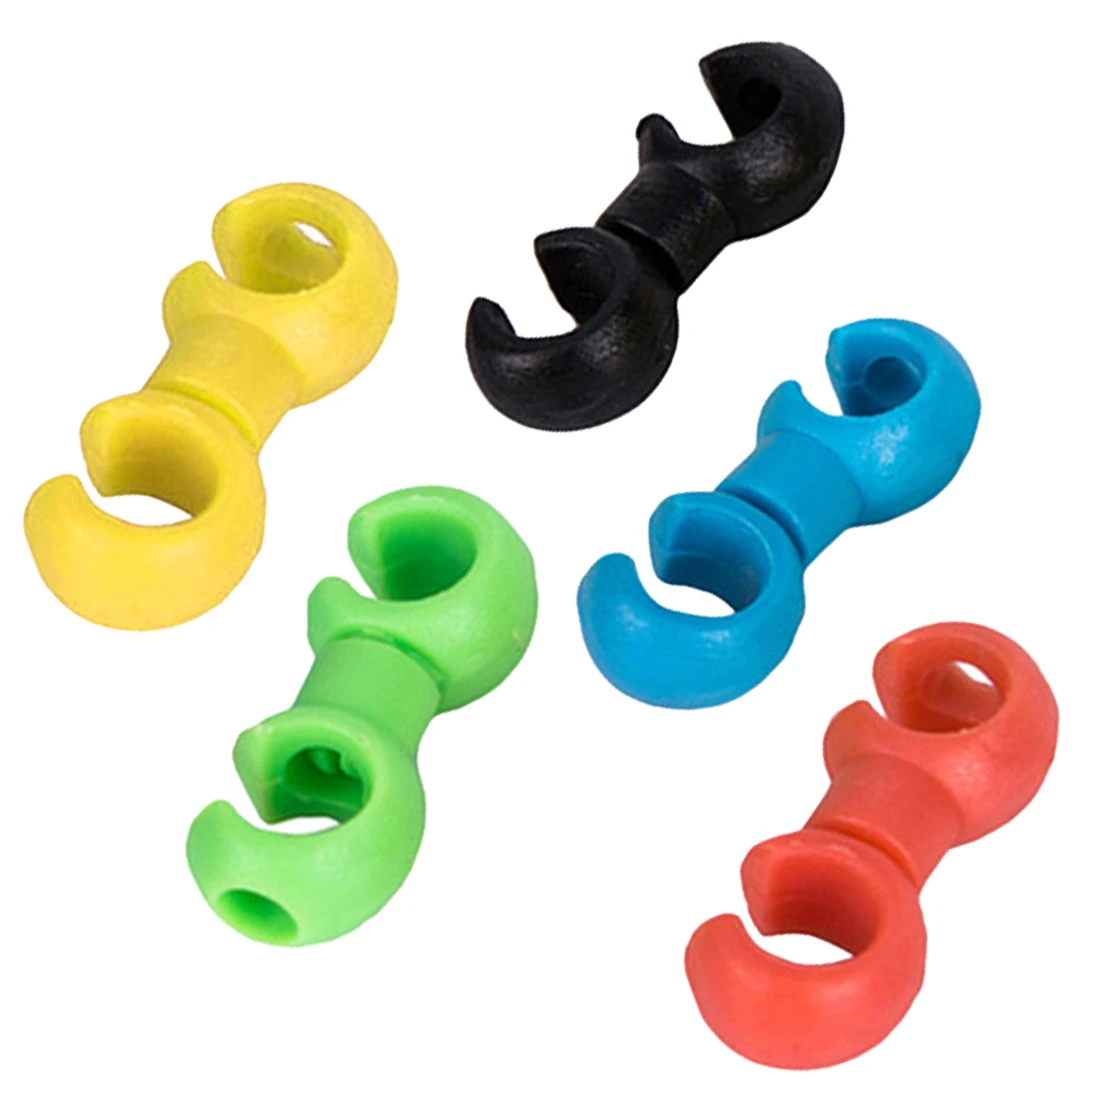 

Hot Sell 10Pcs Bike Road Bicycle Handcuffs Shape Clips Housing Hose Guide For Brake Cable/Derailleur Line Case Clasps